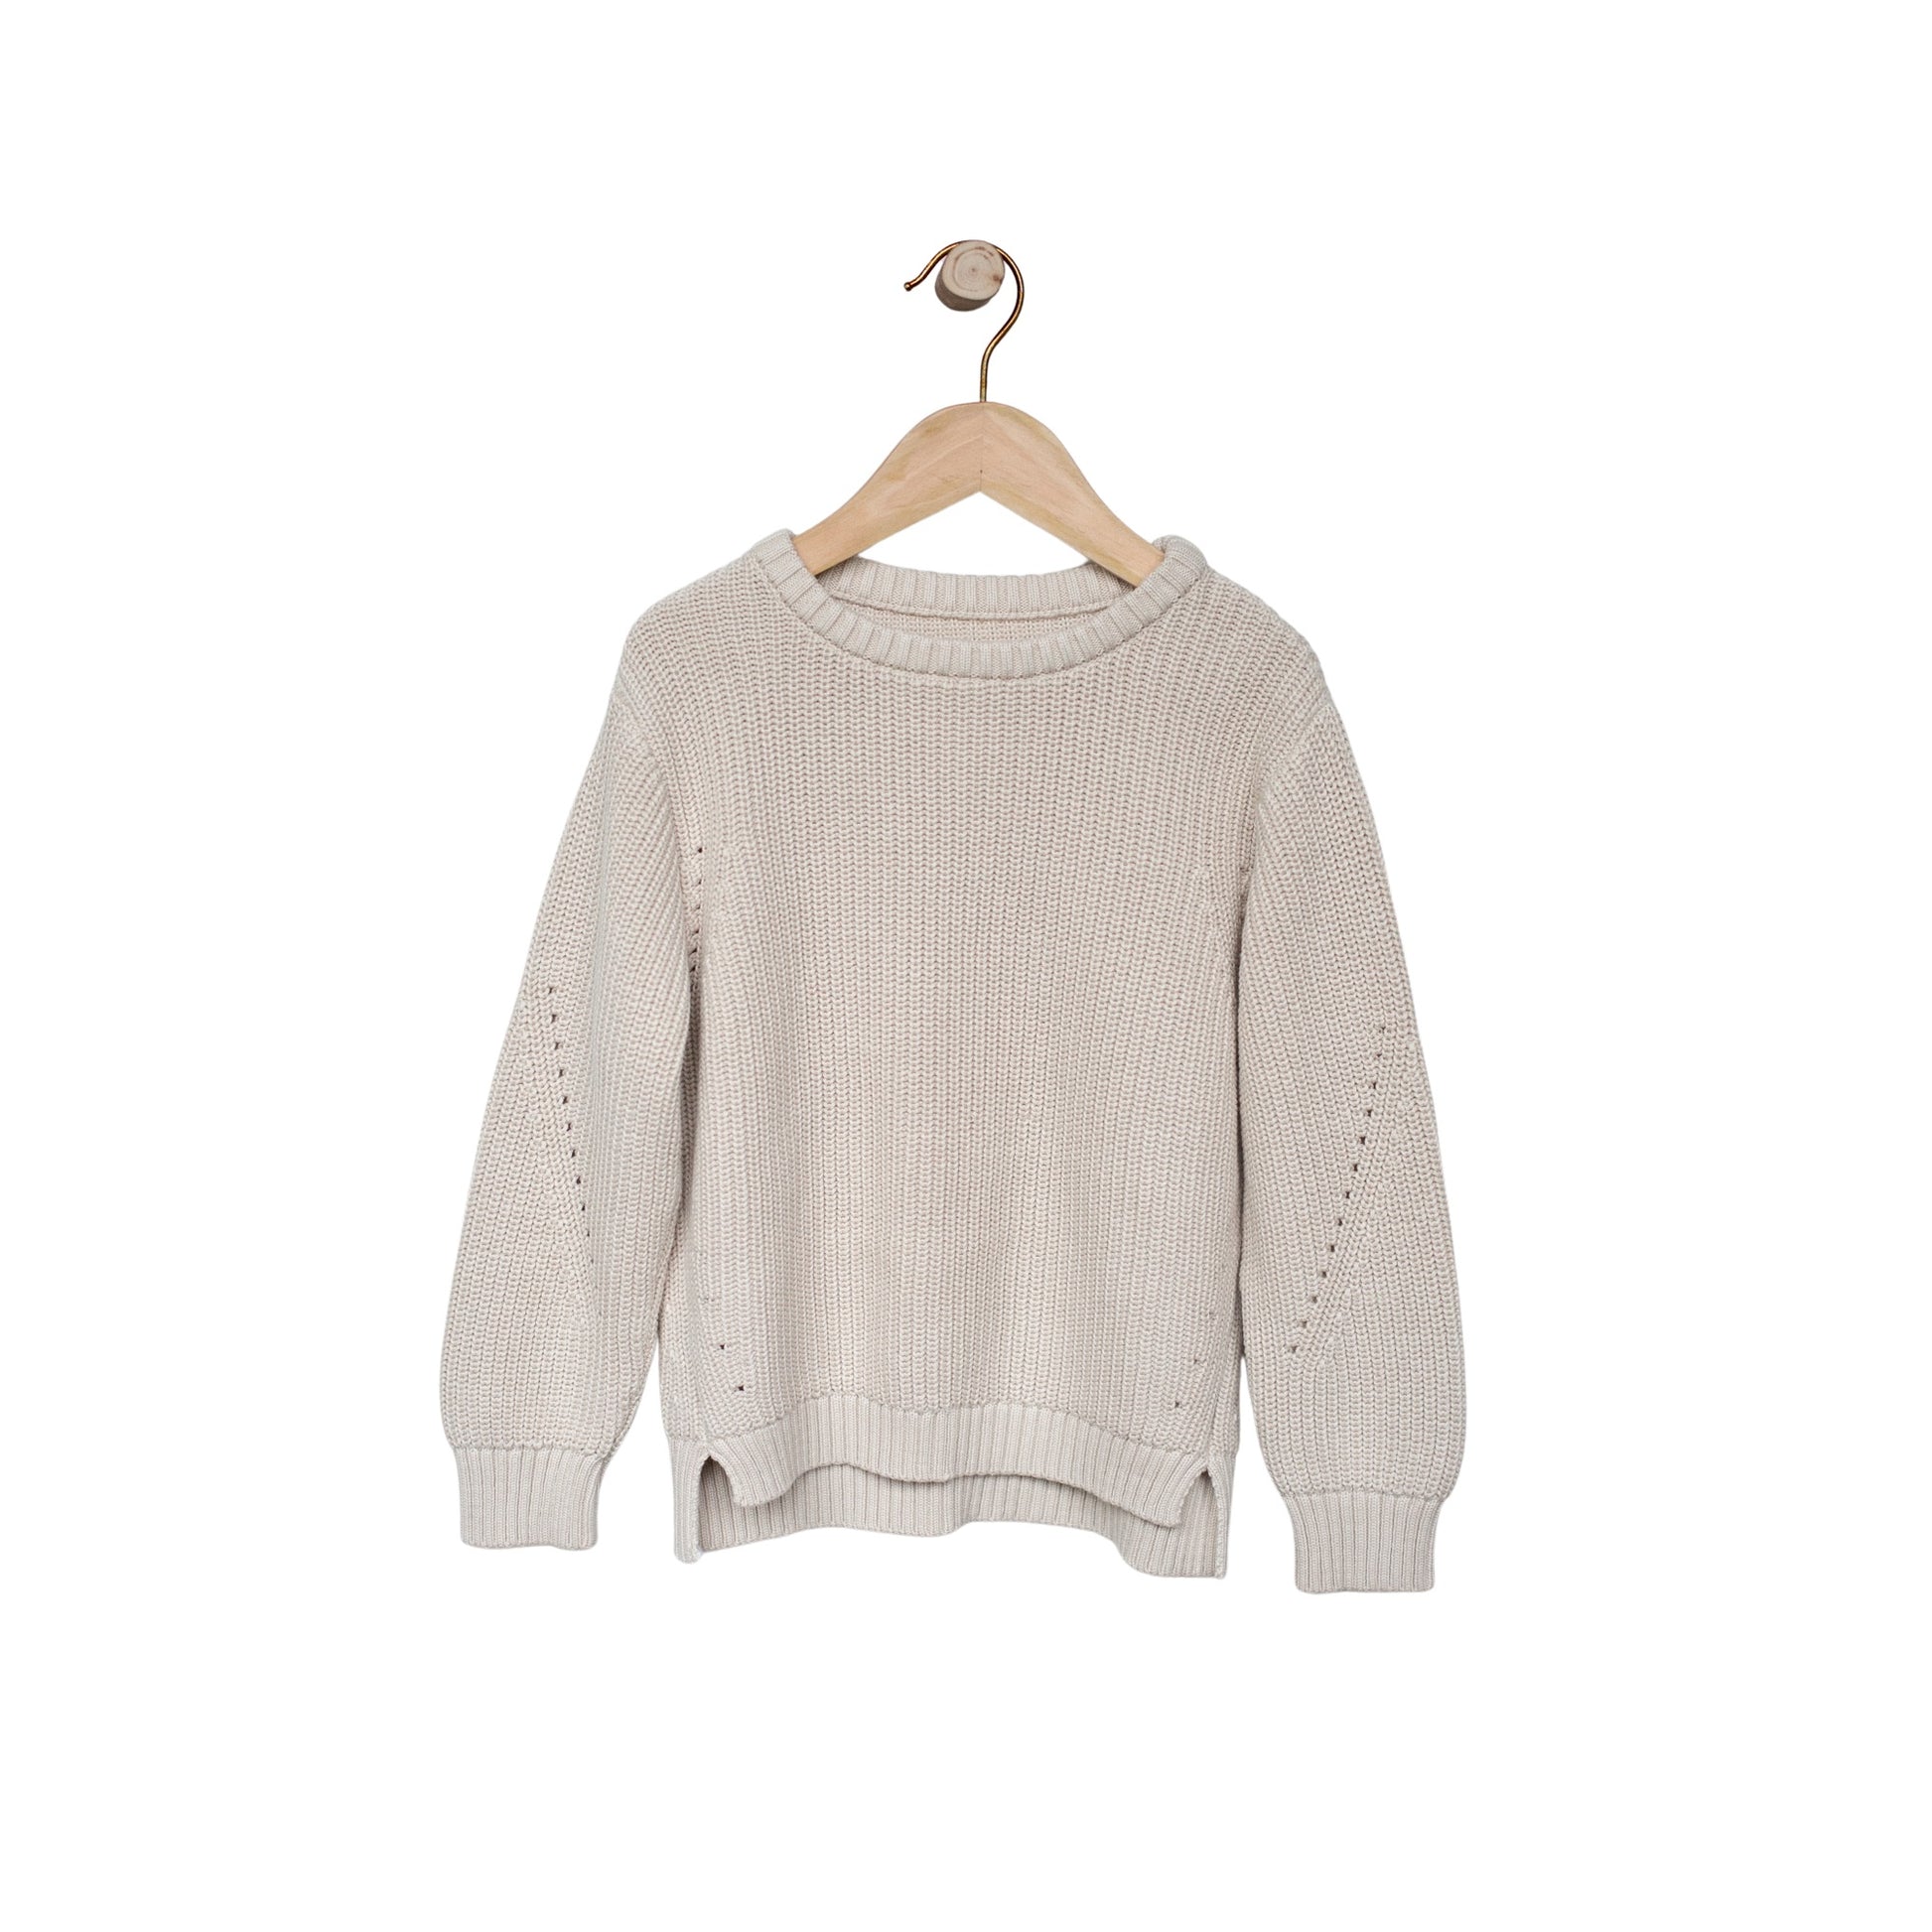 THE SIMPLE FOLK The Essential Sweater Oatmeal ALWAYS SHOW